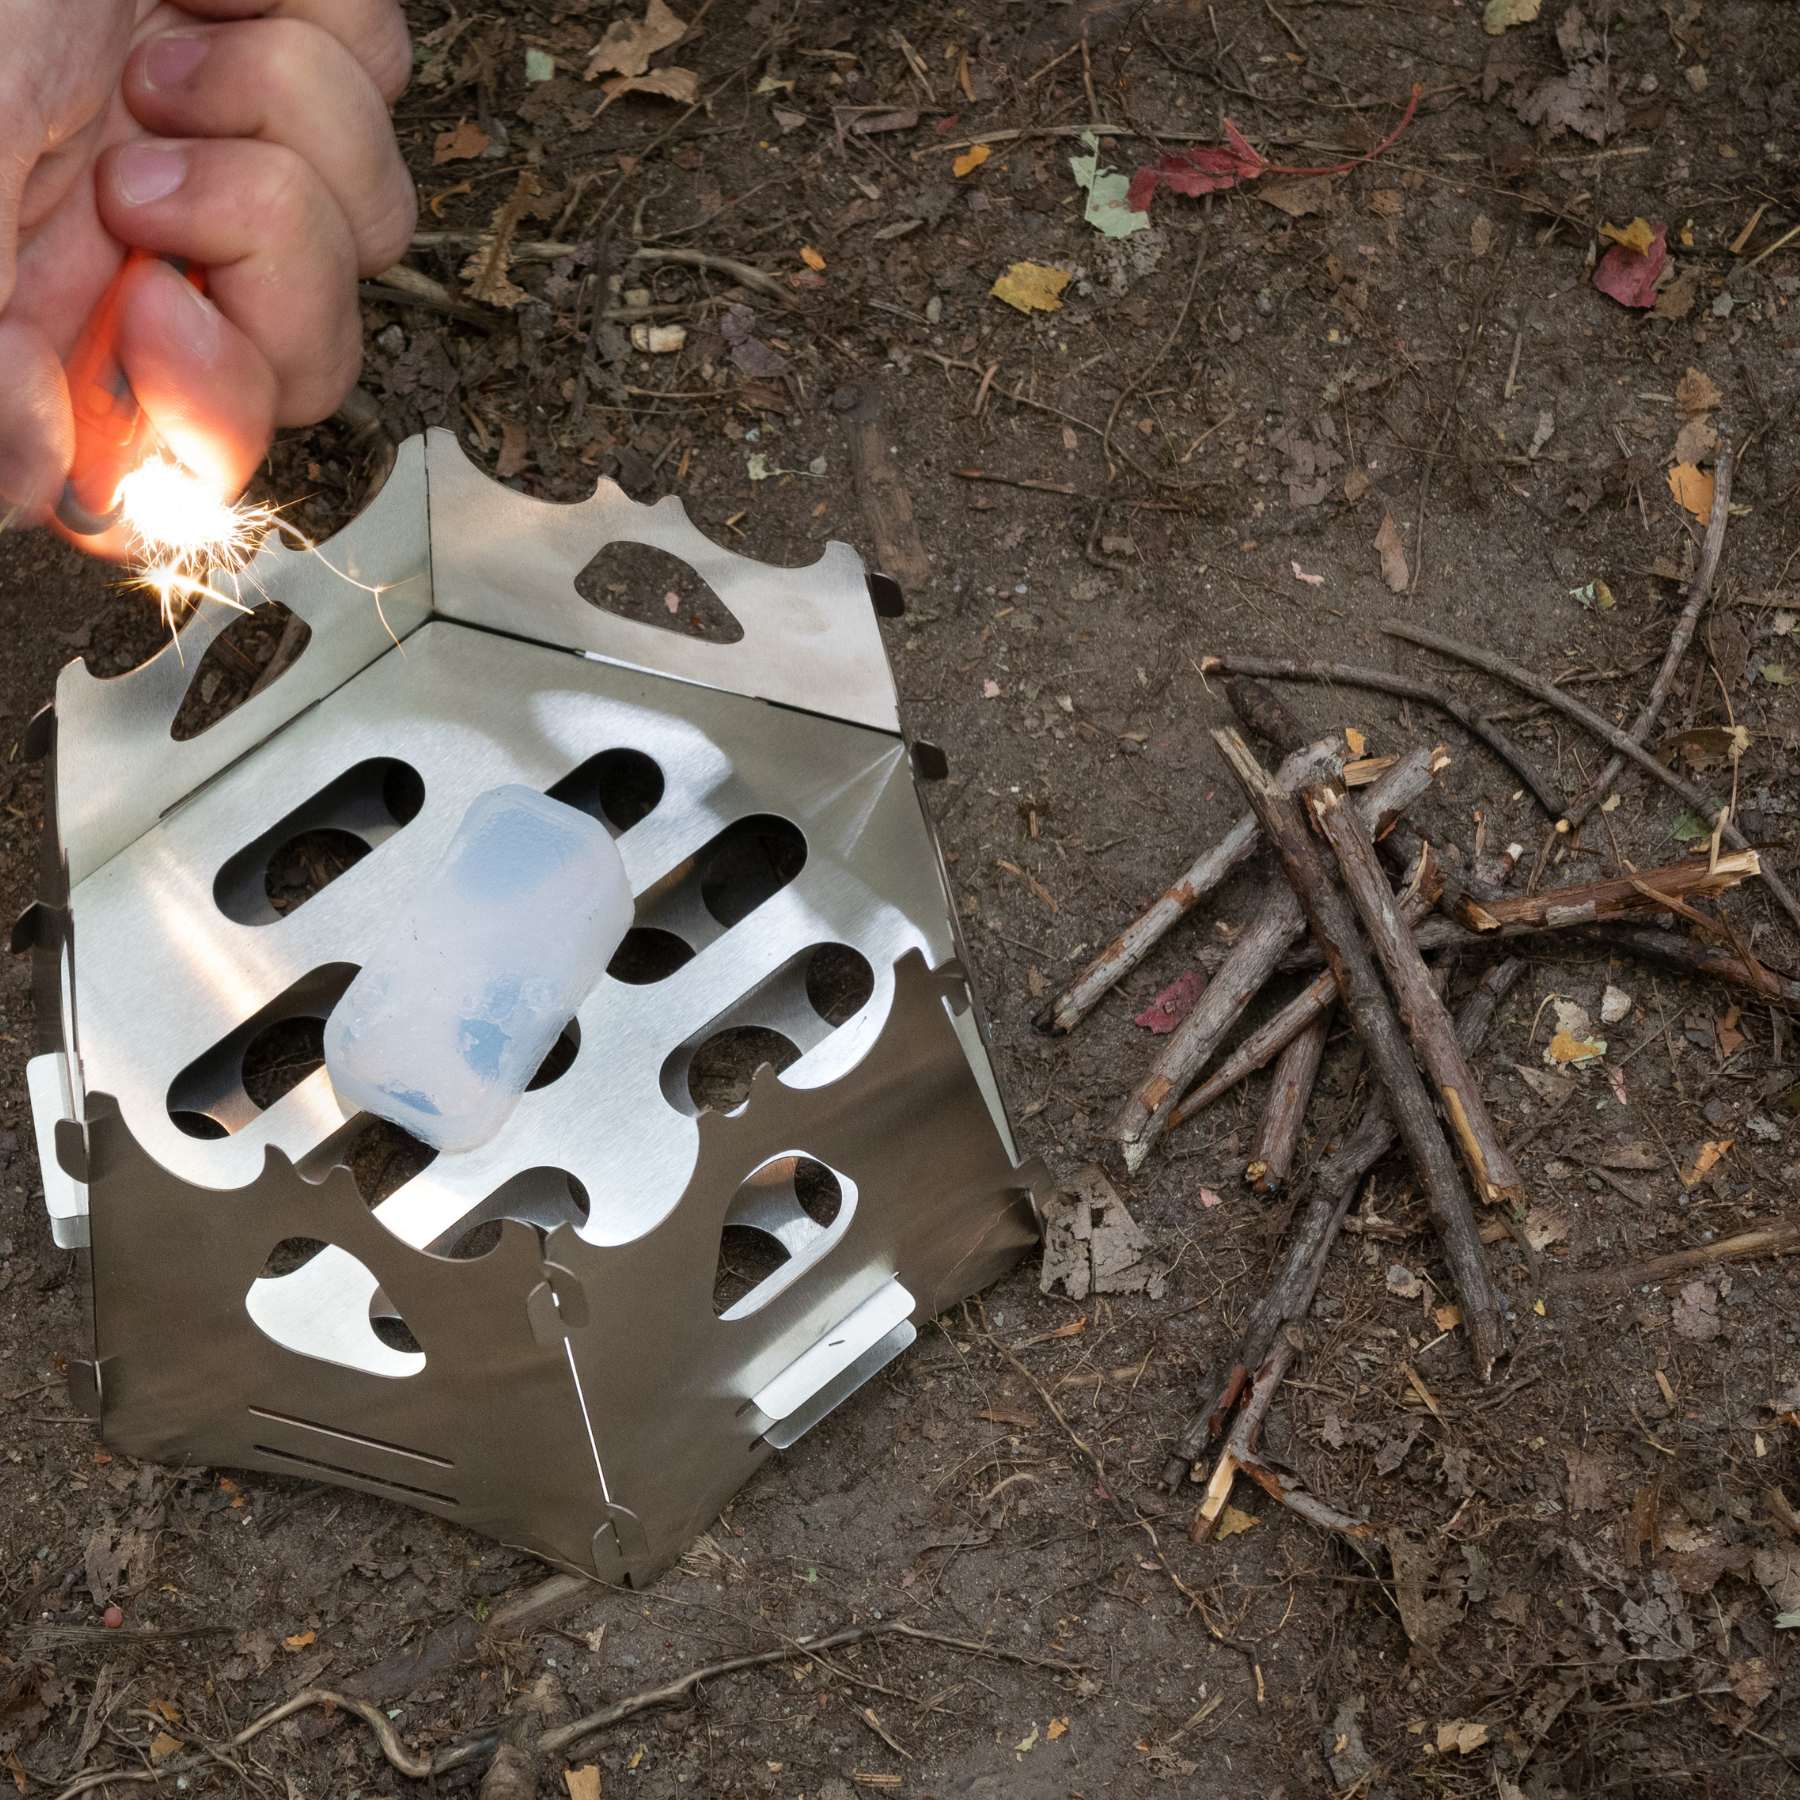 Person Lighting SOL Fire Cubes in Backpacking Stove on Dirt Ground